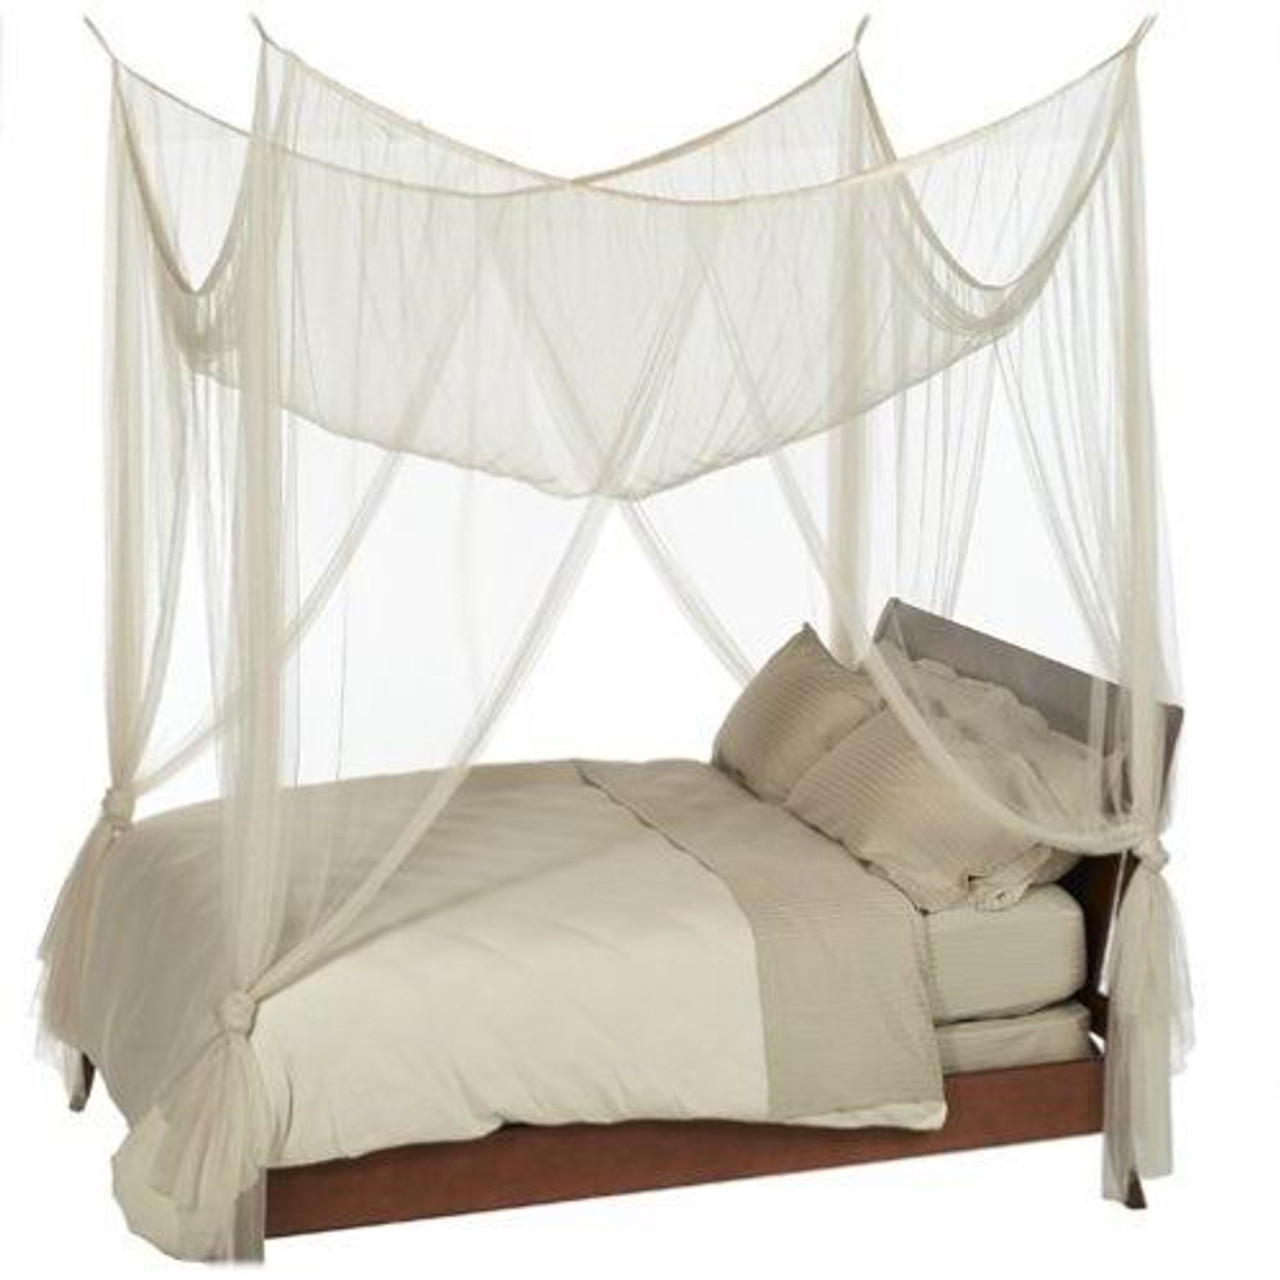 Buy Mosquito Net Canopies, Cream 4 Point Canopies, Netting for